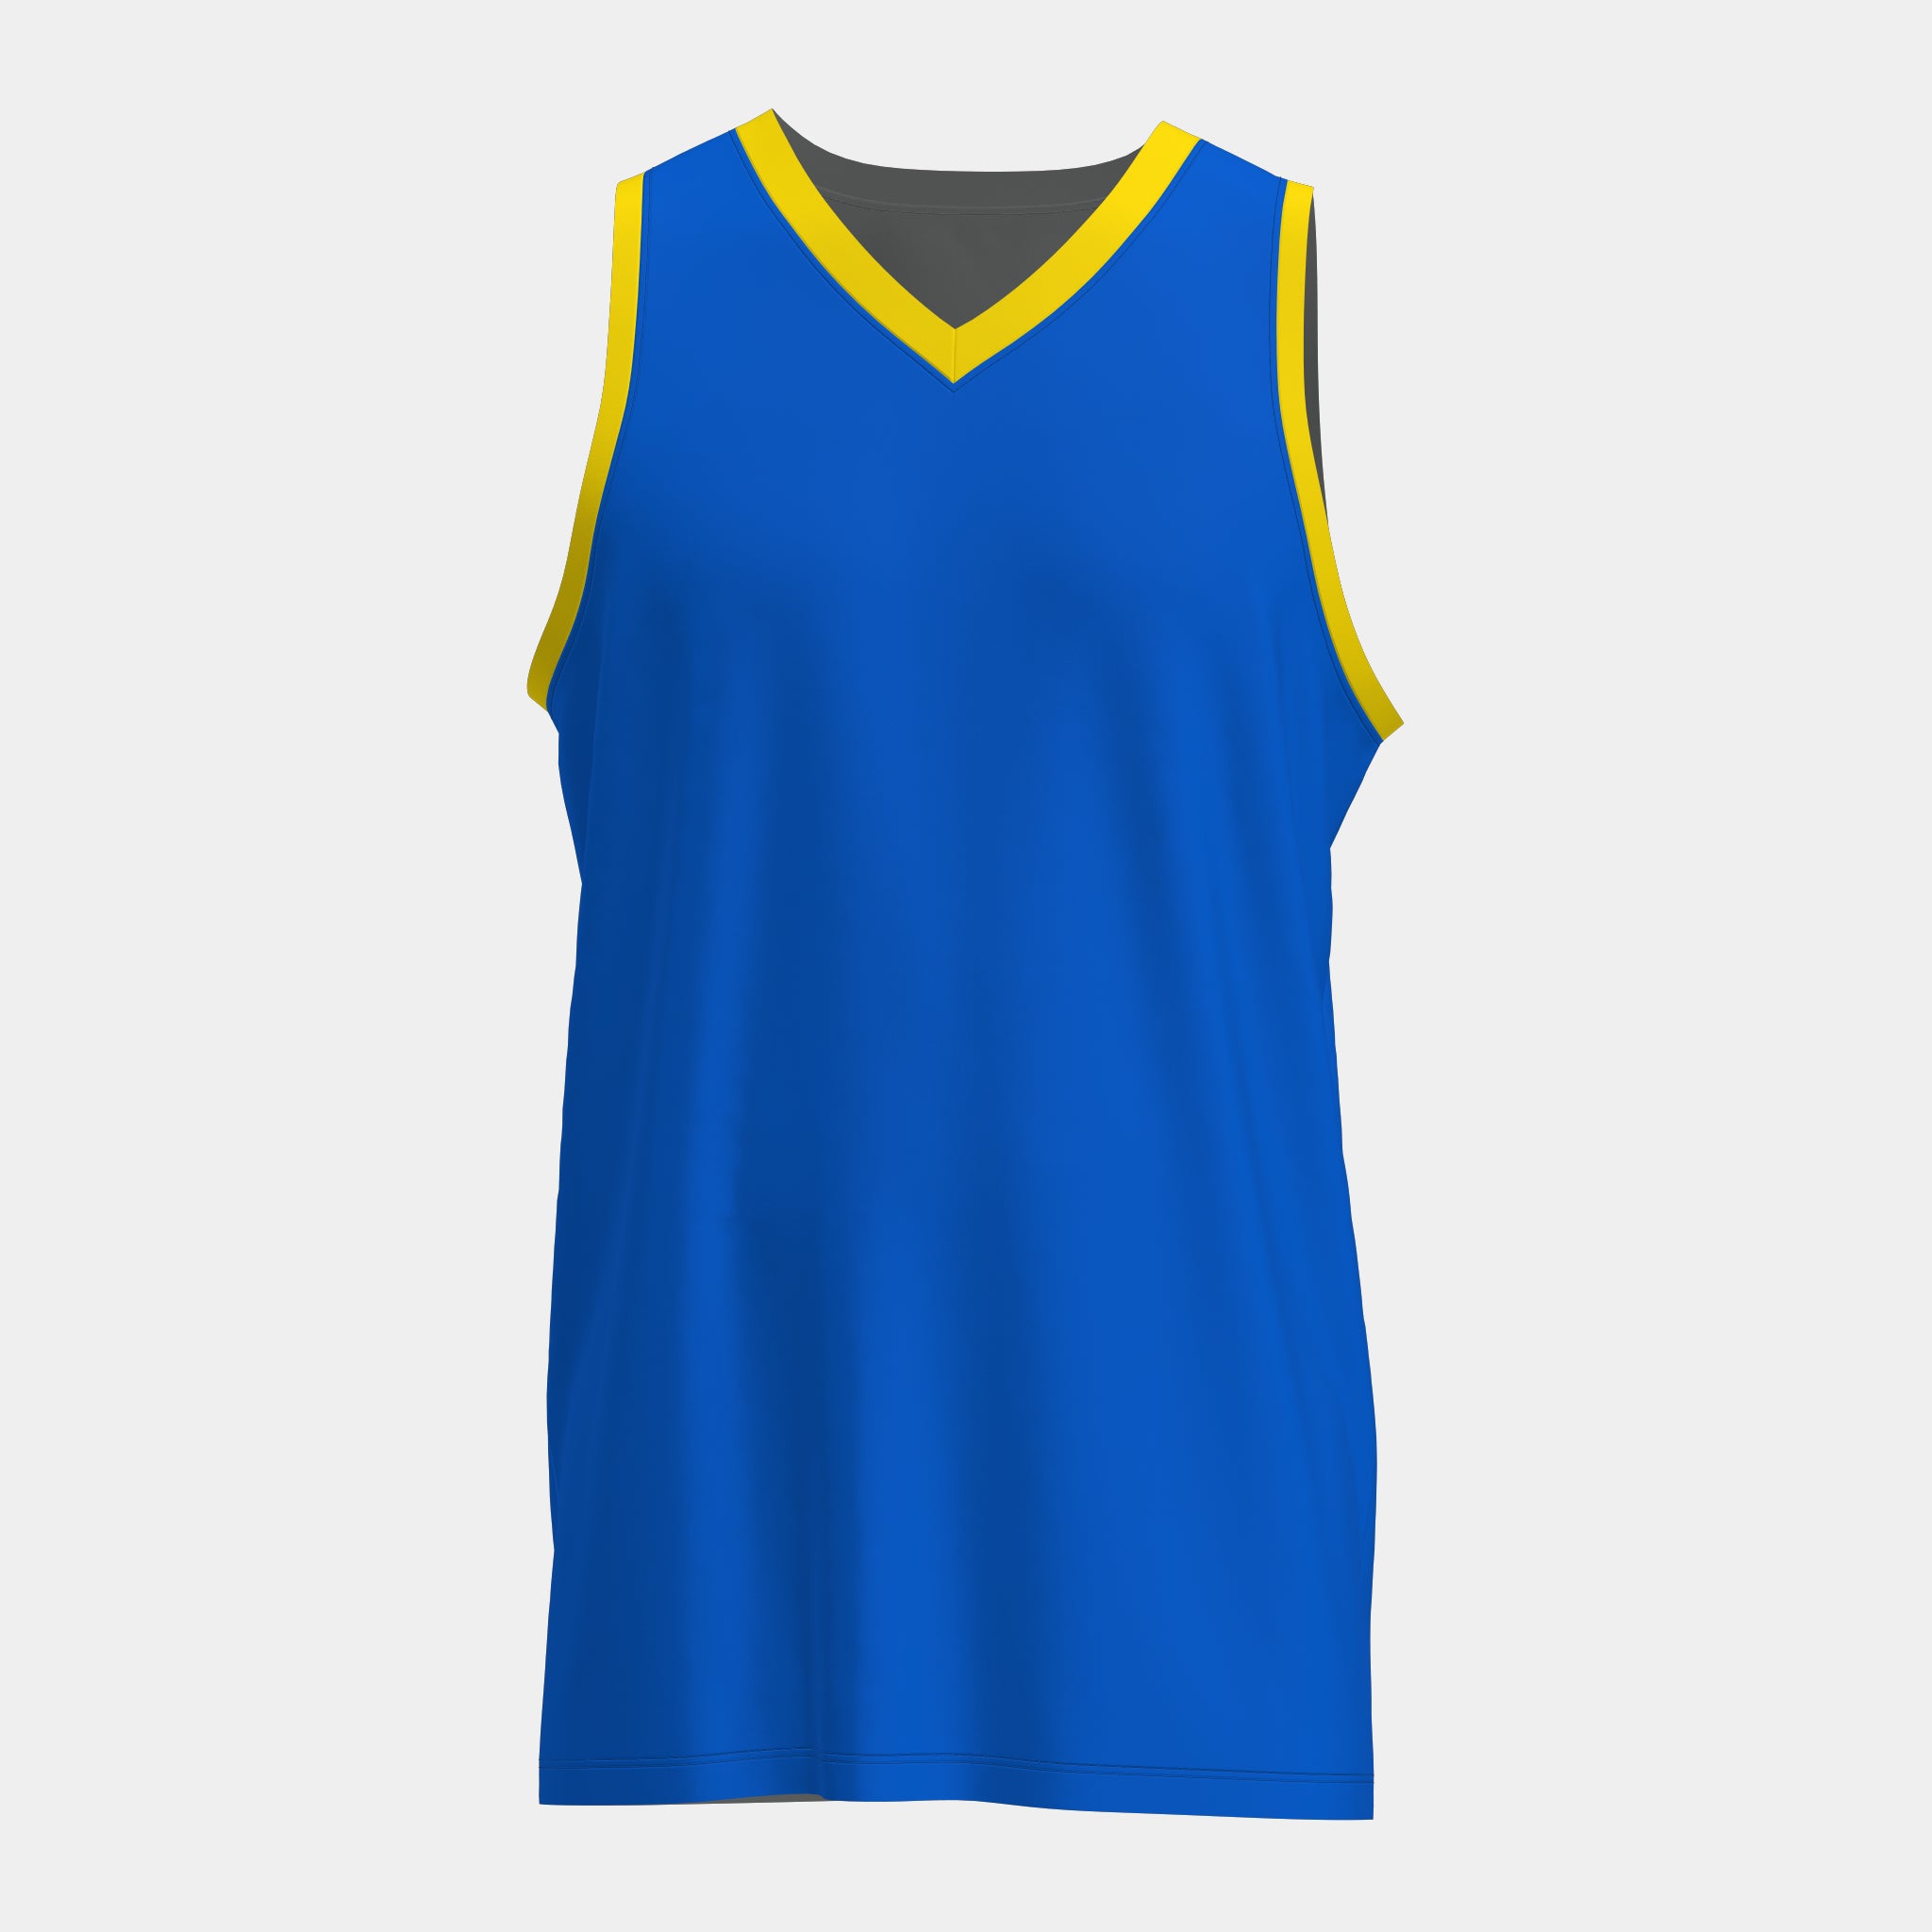 White Front And Back Nba Basketball Jersey Illustrations throughout Blank  Basketball Unifor…